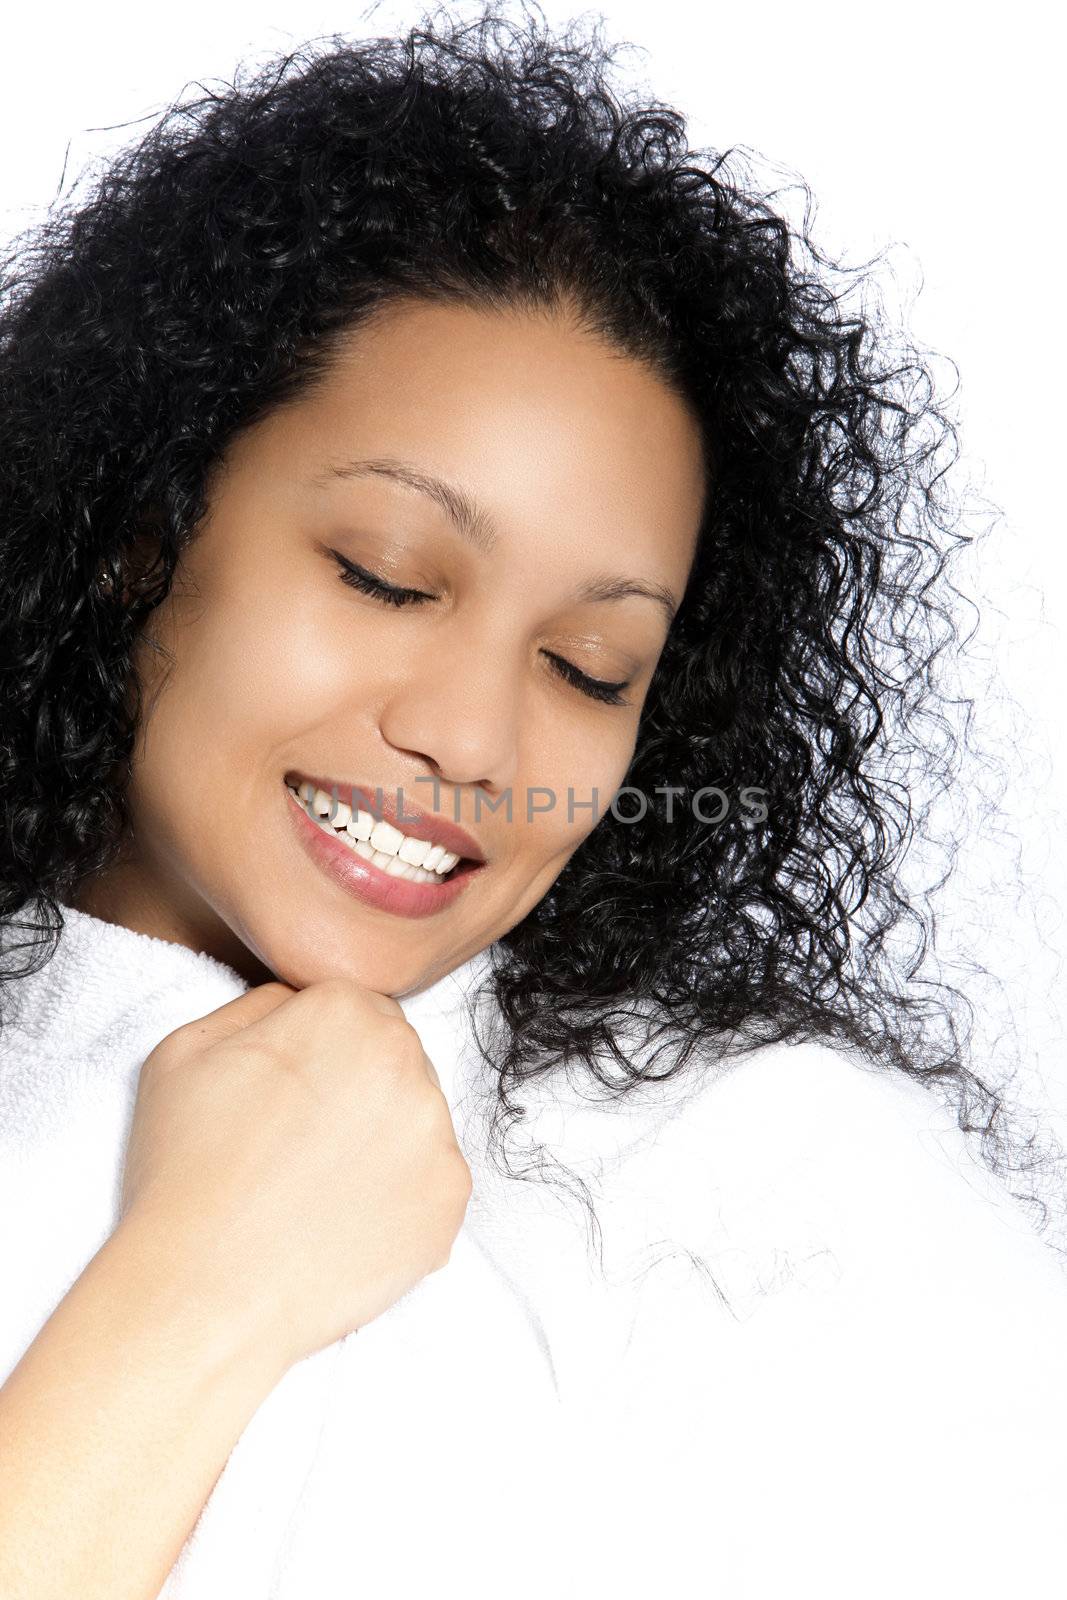 Beautiful girl with black curly hair, smiling with eyes closed